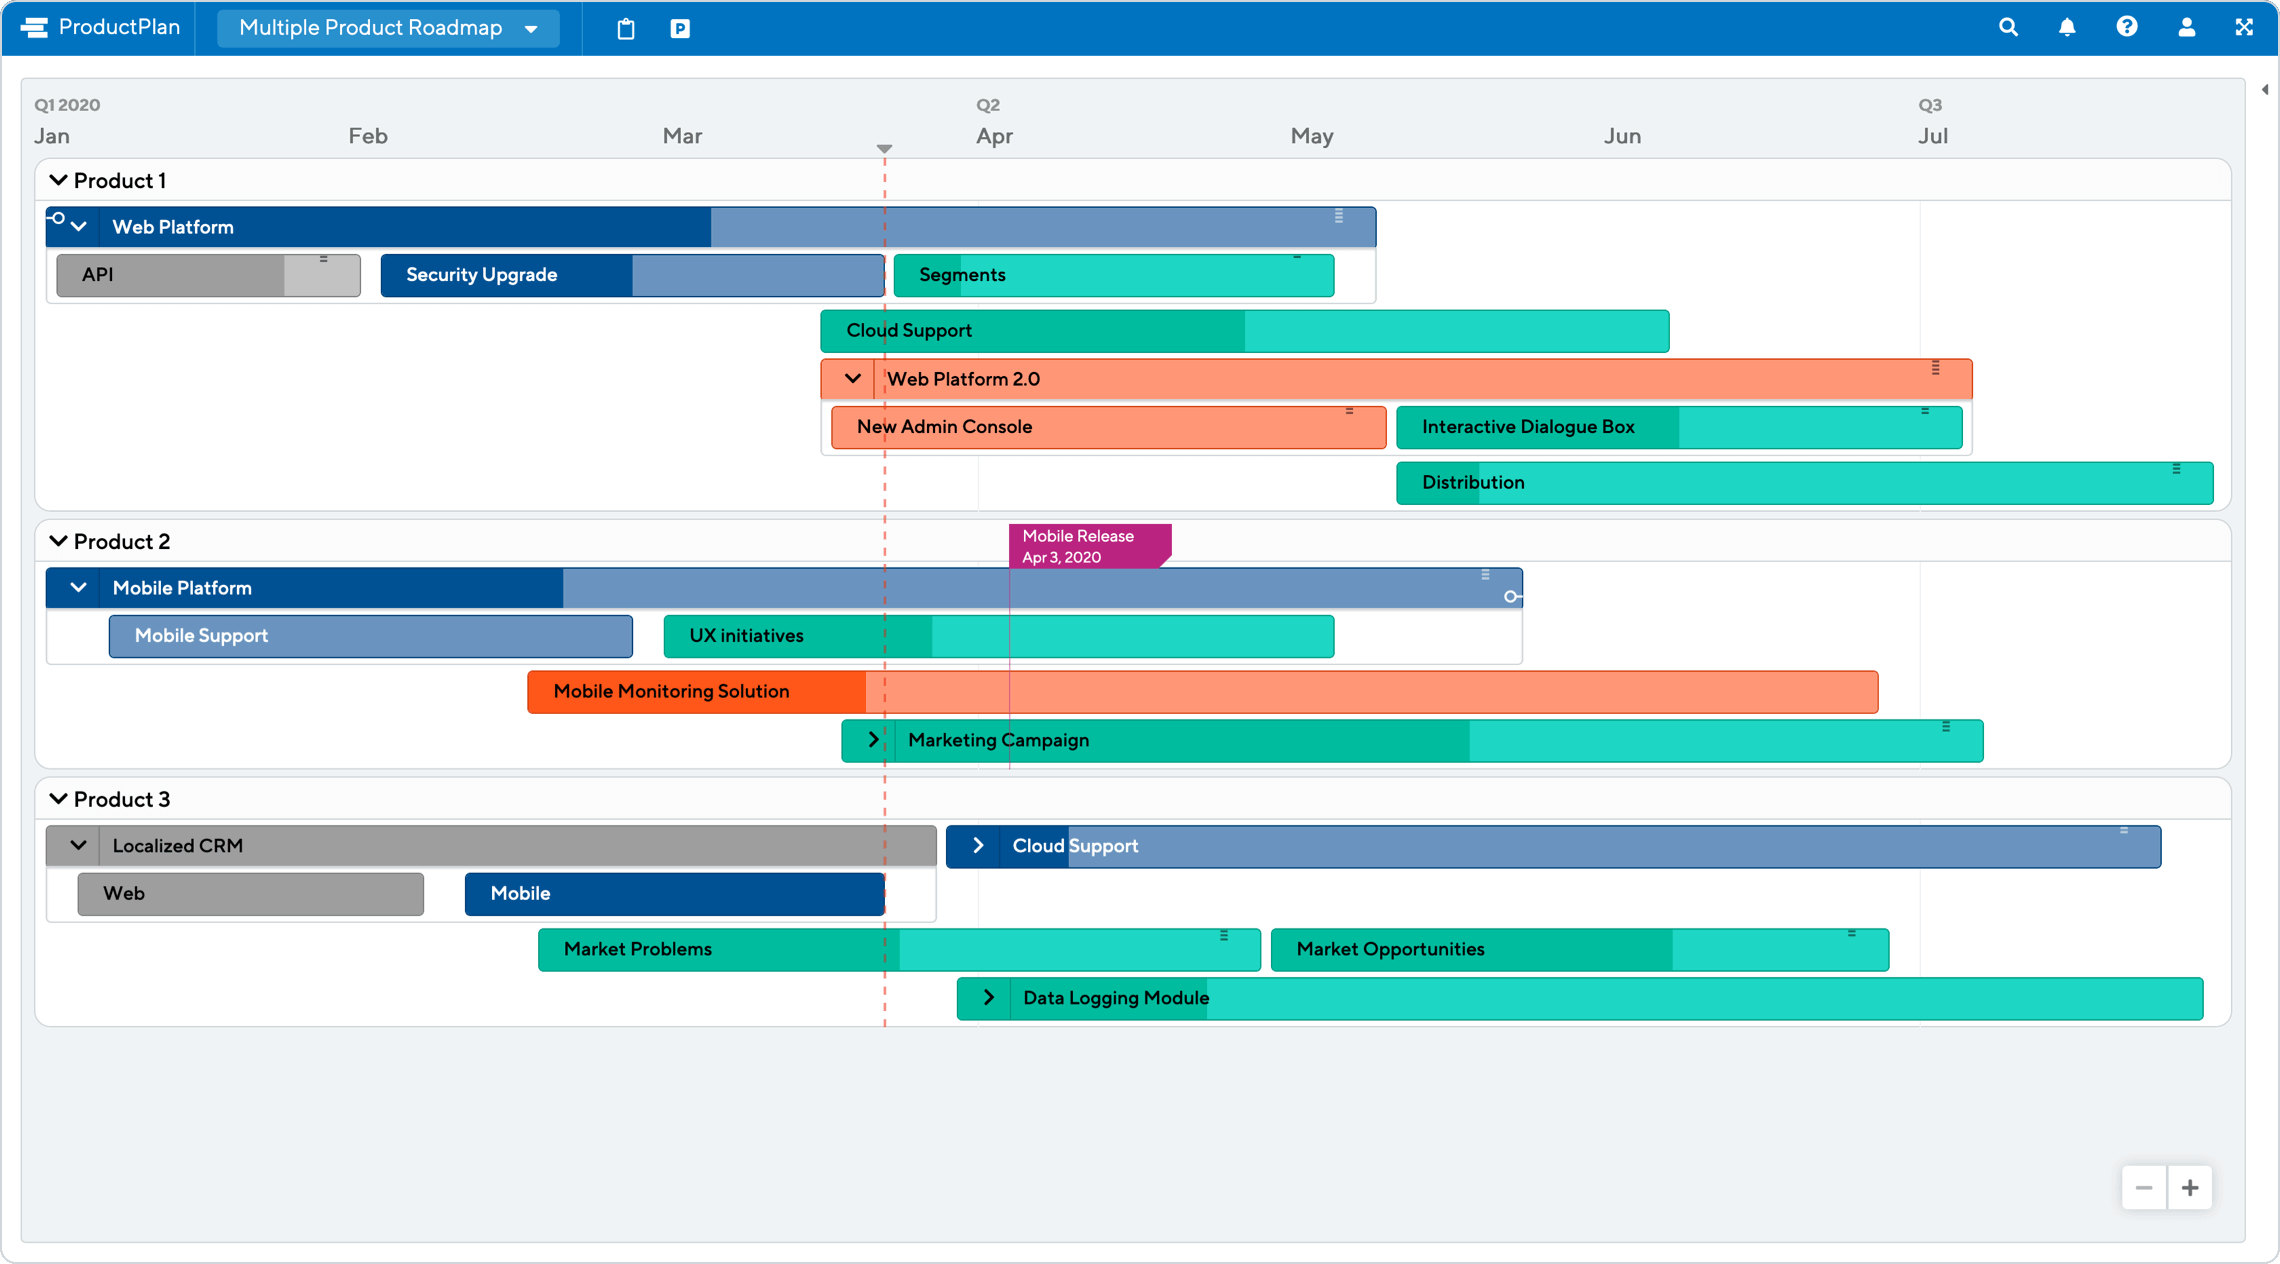 Product Roadmap Template